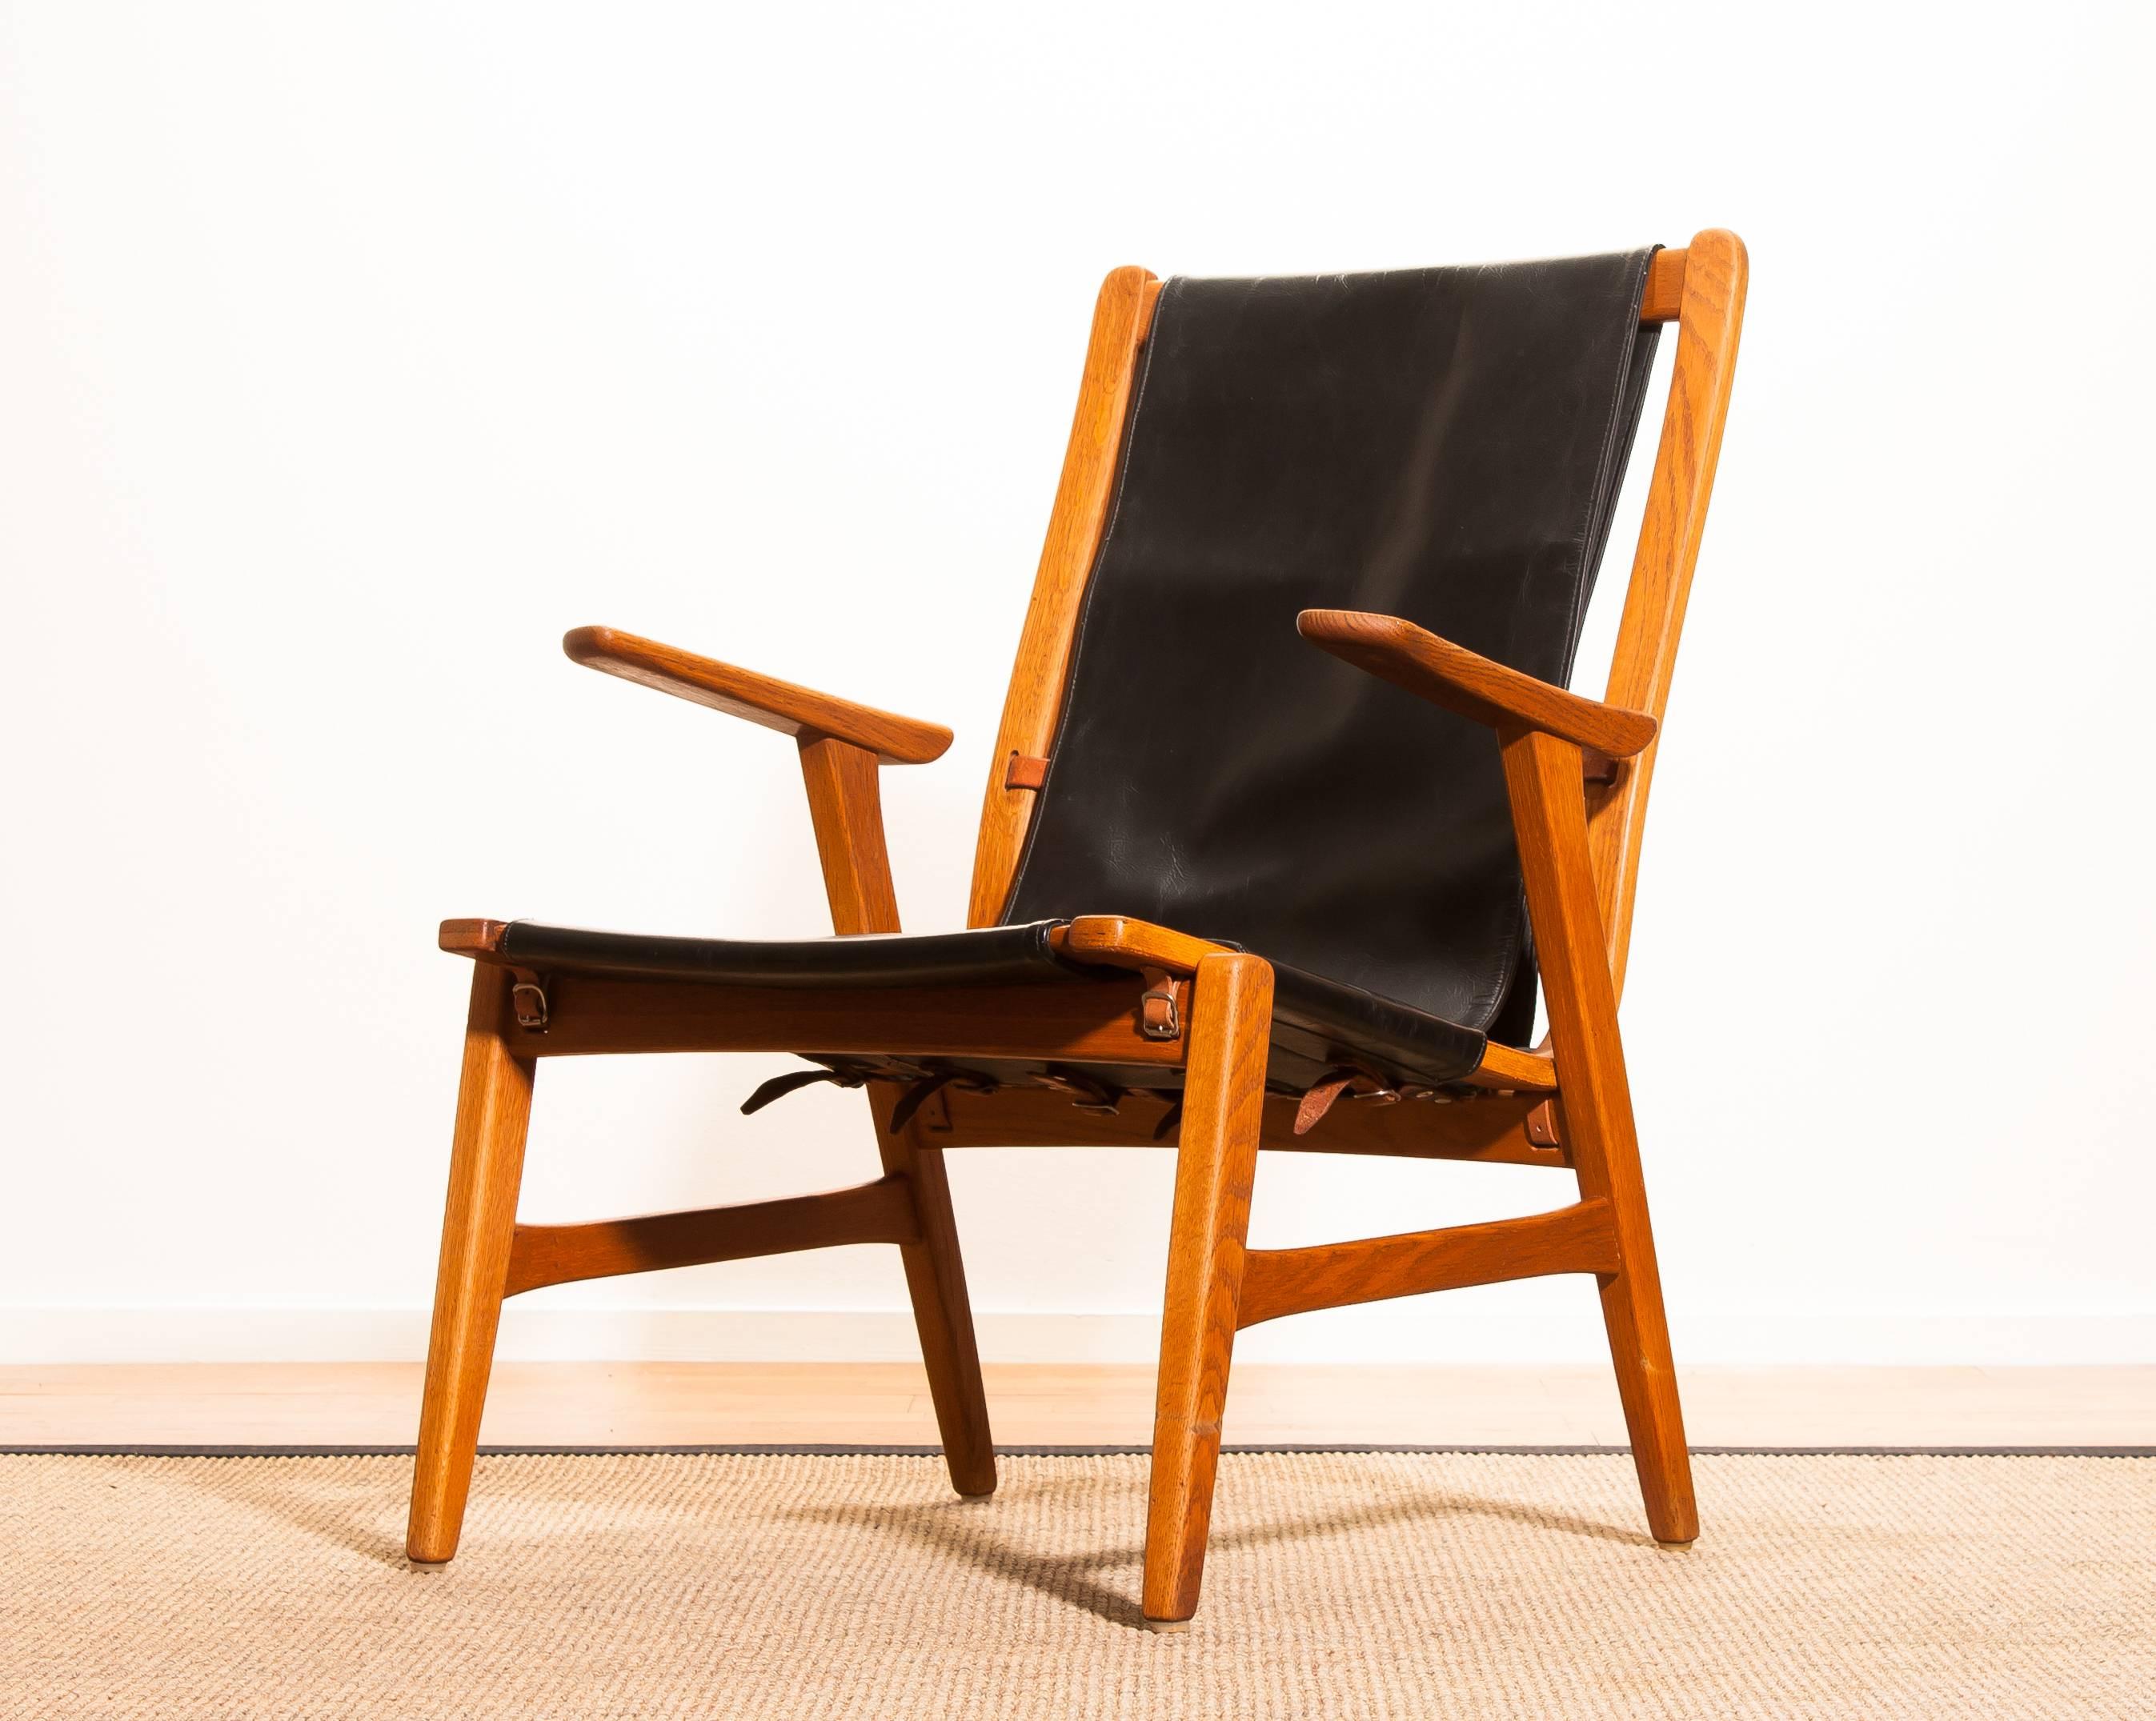 Swedish 1950s, Oak and Leather Hunting Chair 'Ulrika' by Östen Kristiansson